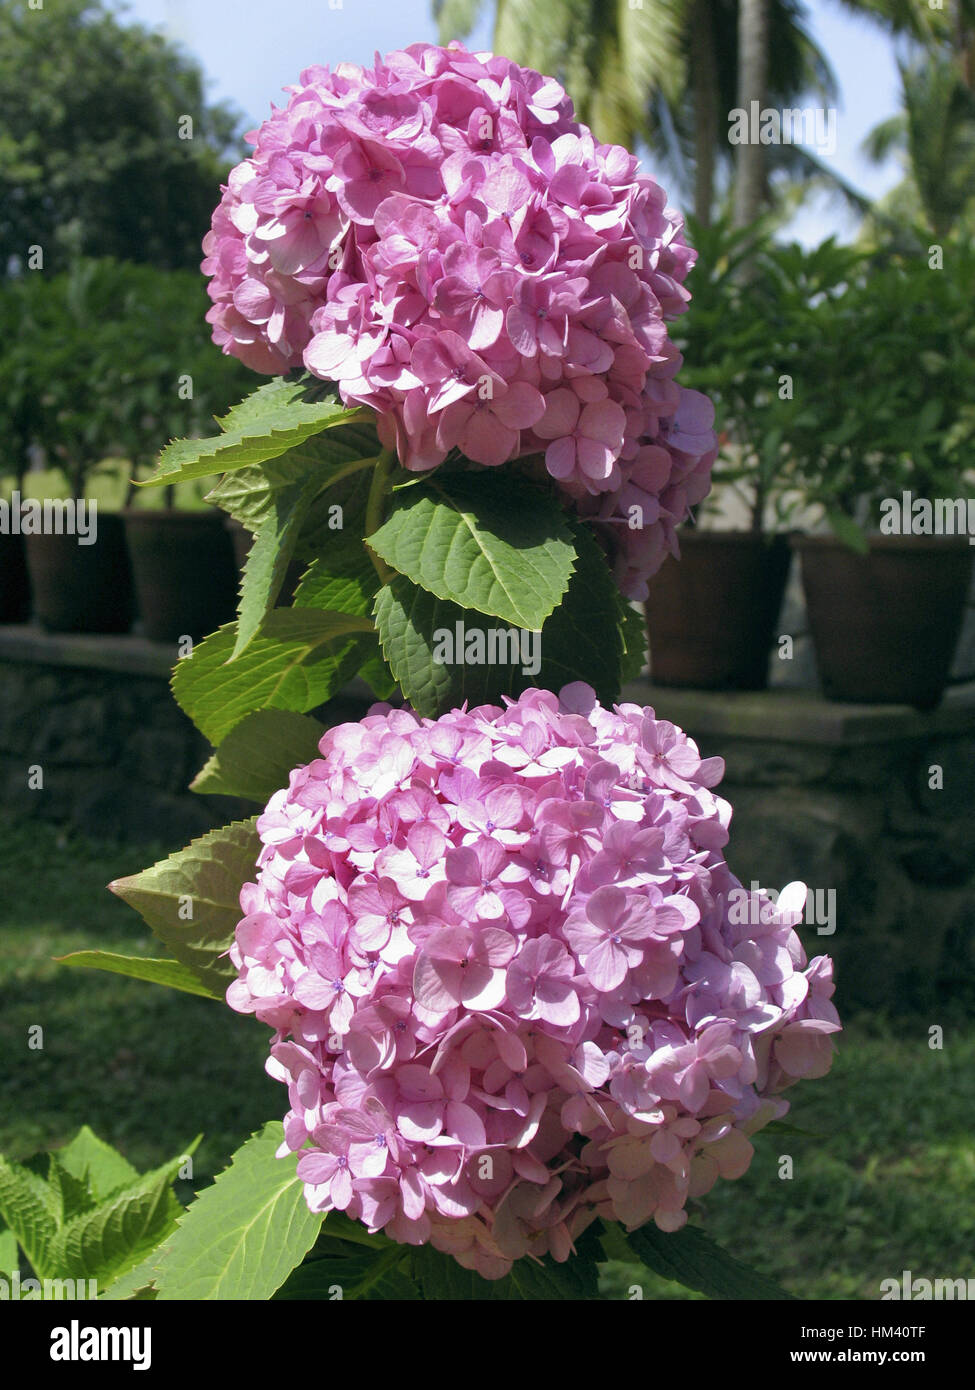 Indian Pink Ixora flower is a genus of flowering plants in the Rubiaceae family.  Ixora grows commonly in subtropical climates in the United States, s Stock Photo